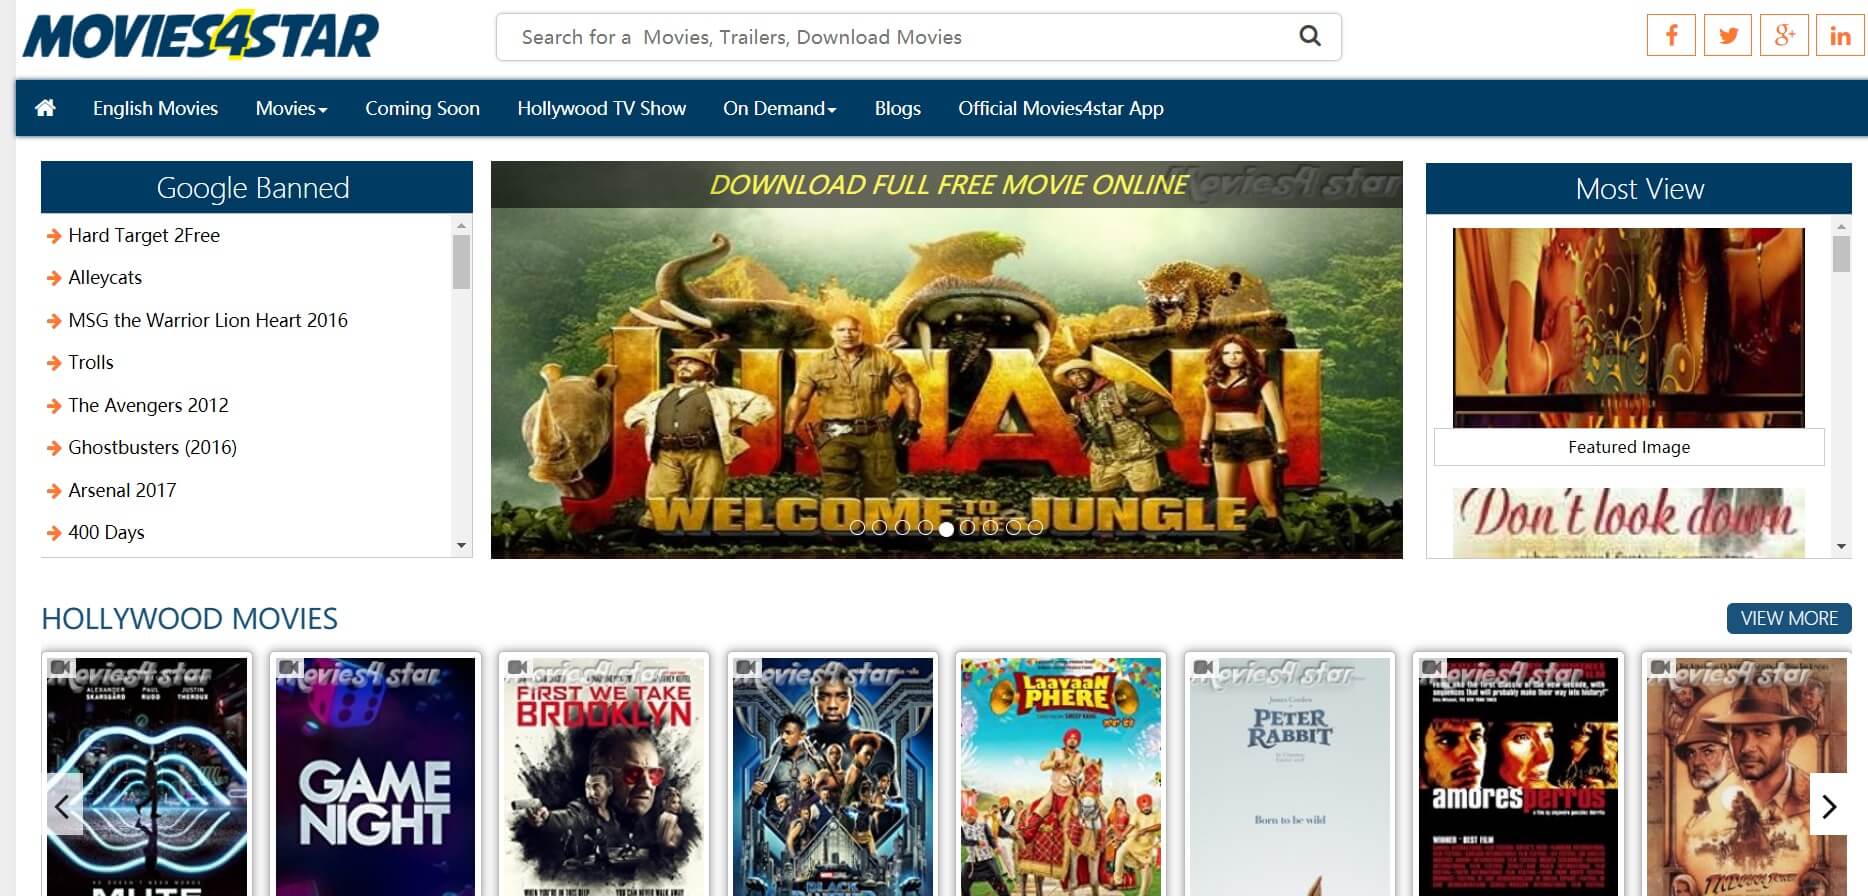 what is the best free movies download websites